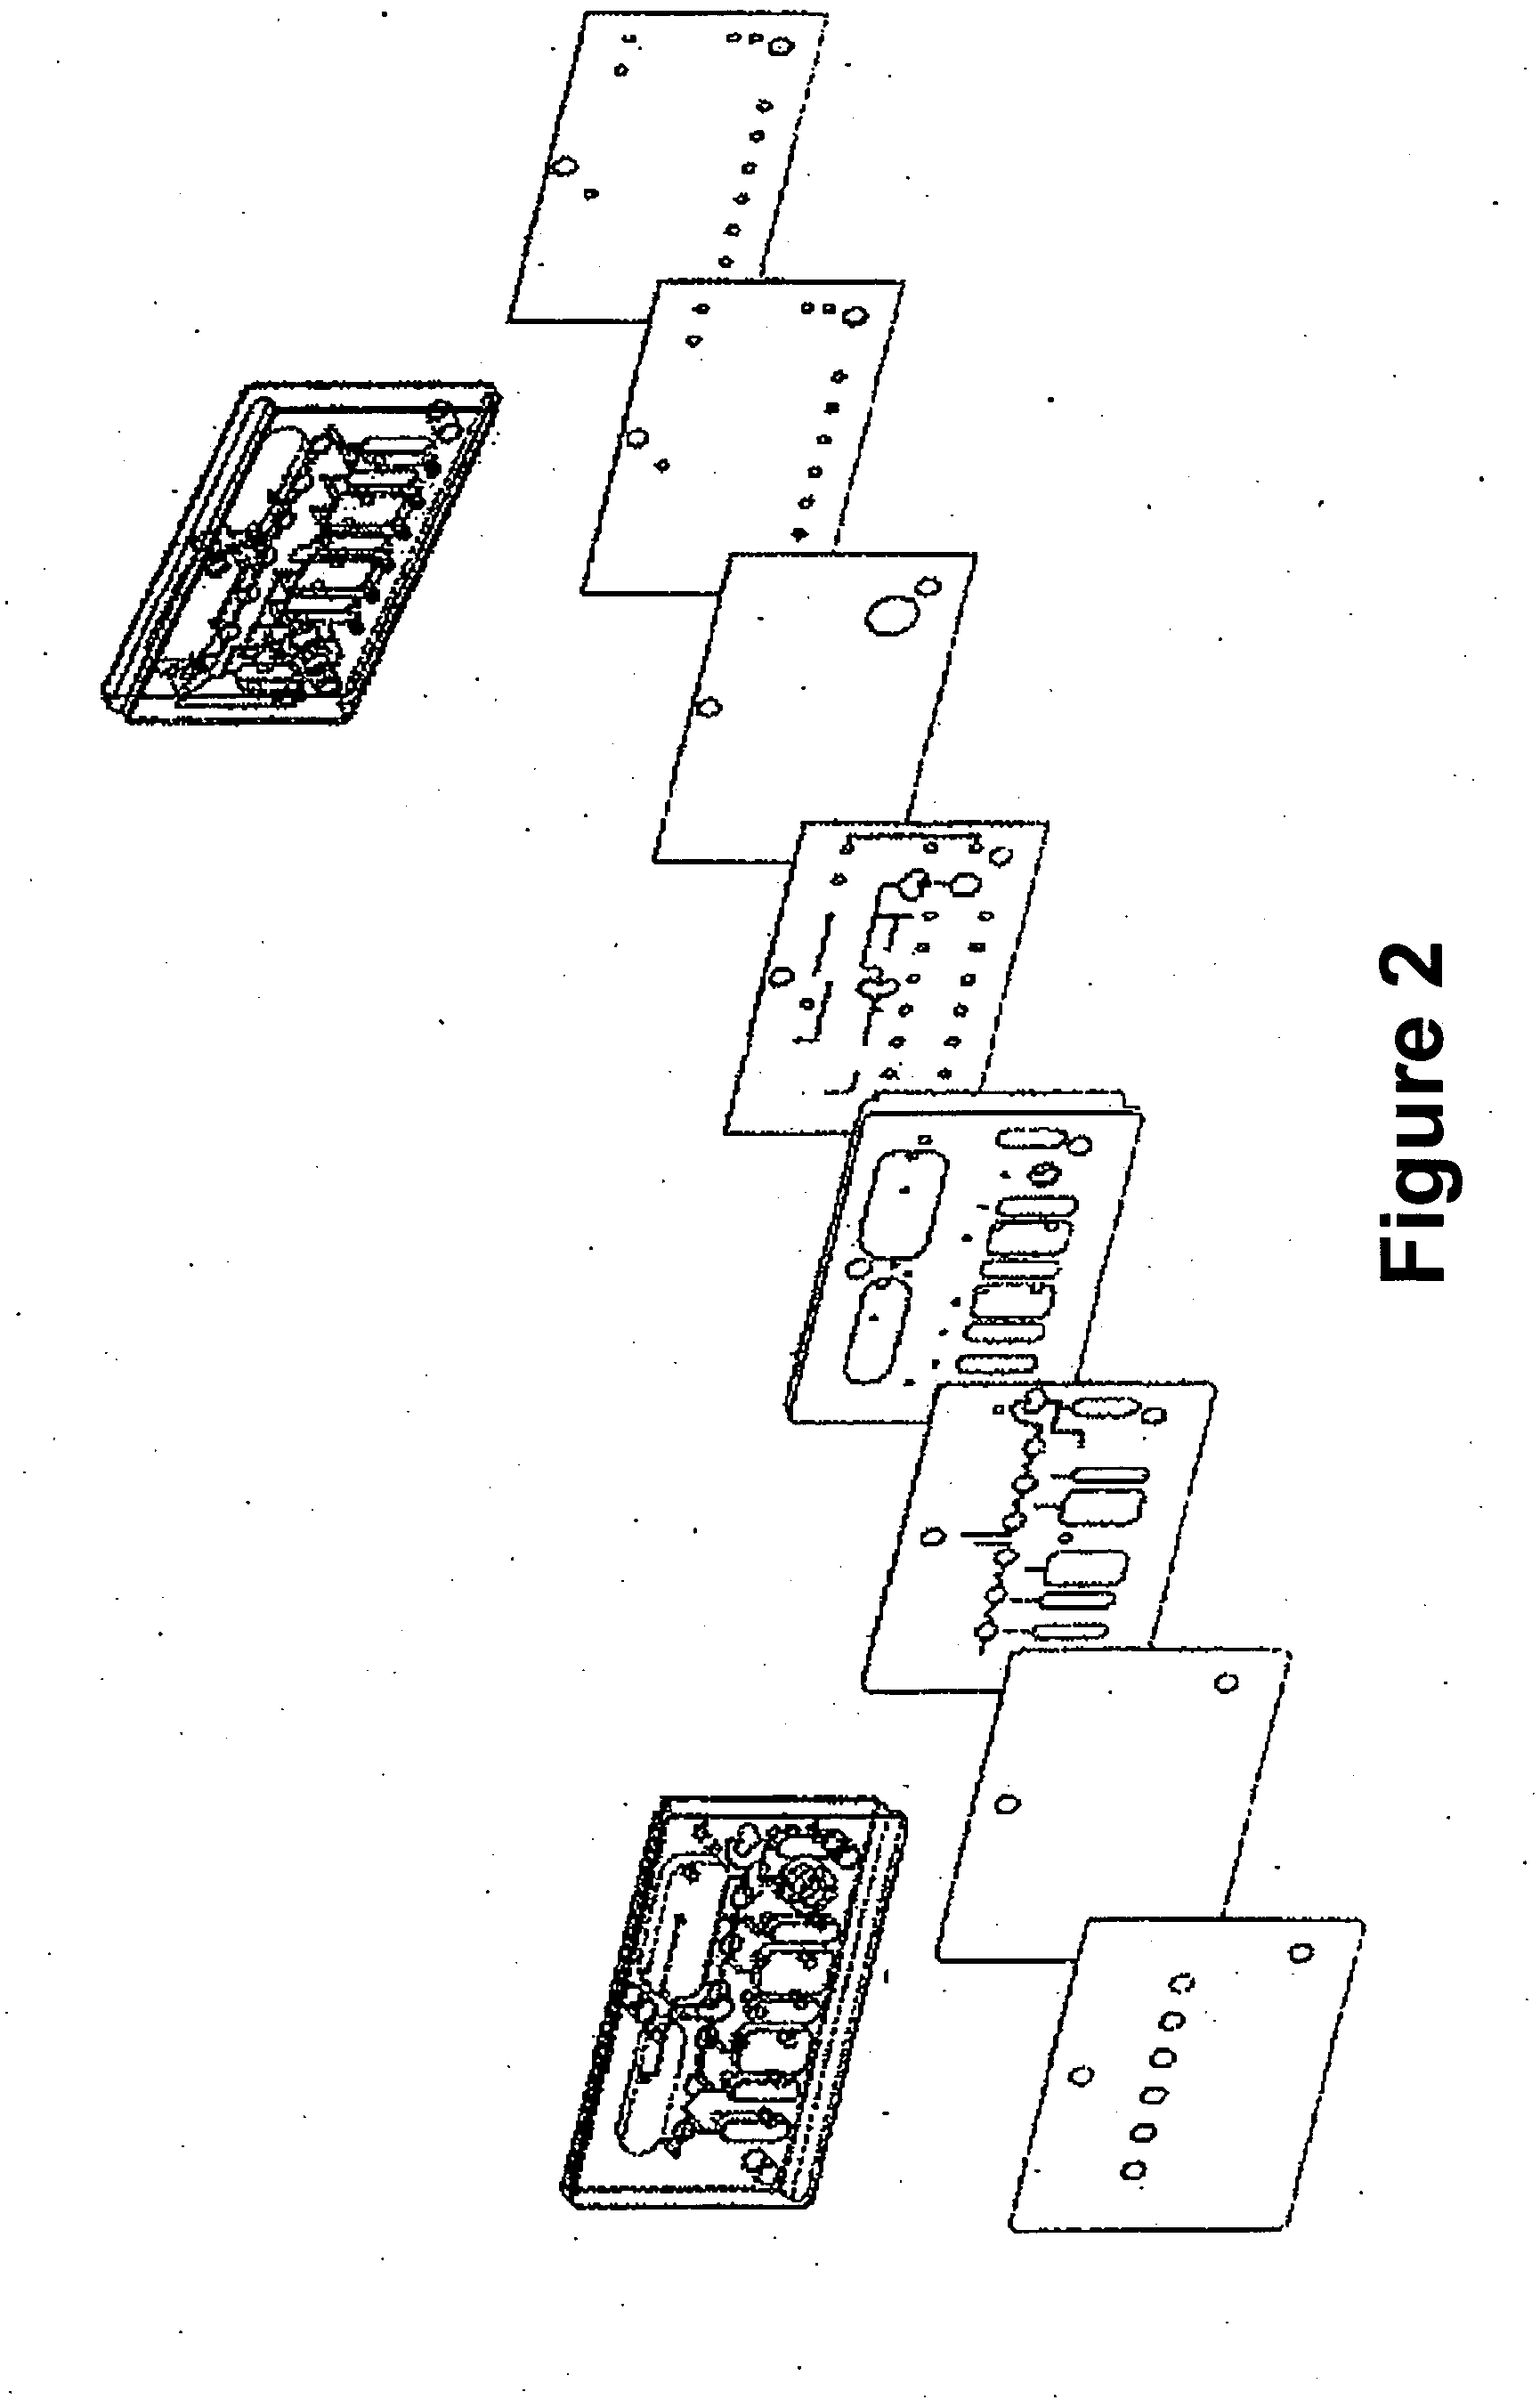 Systems and methods for conducting animal studies